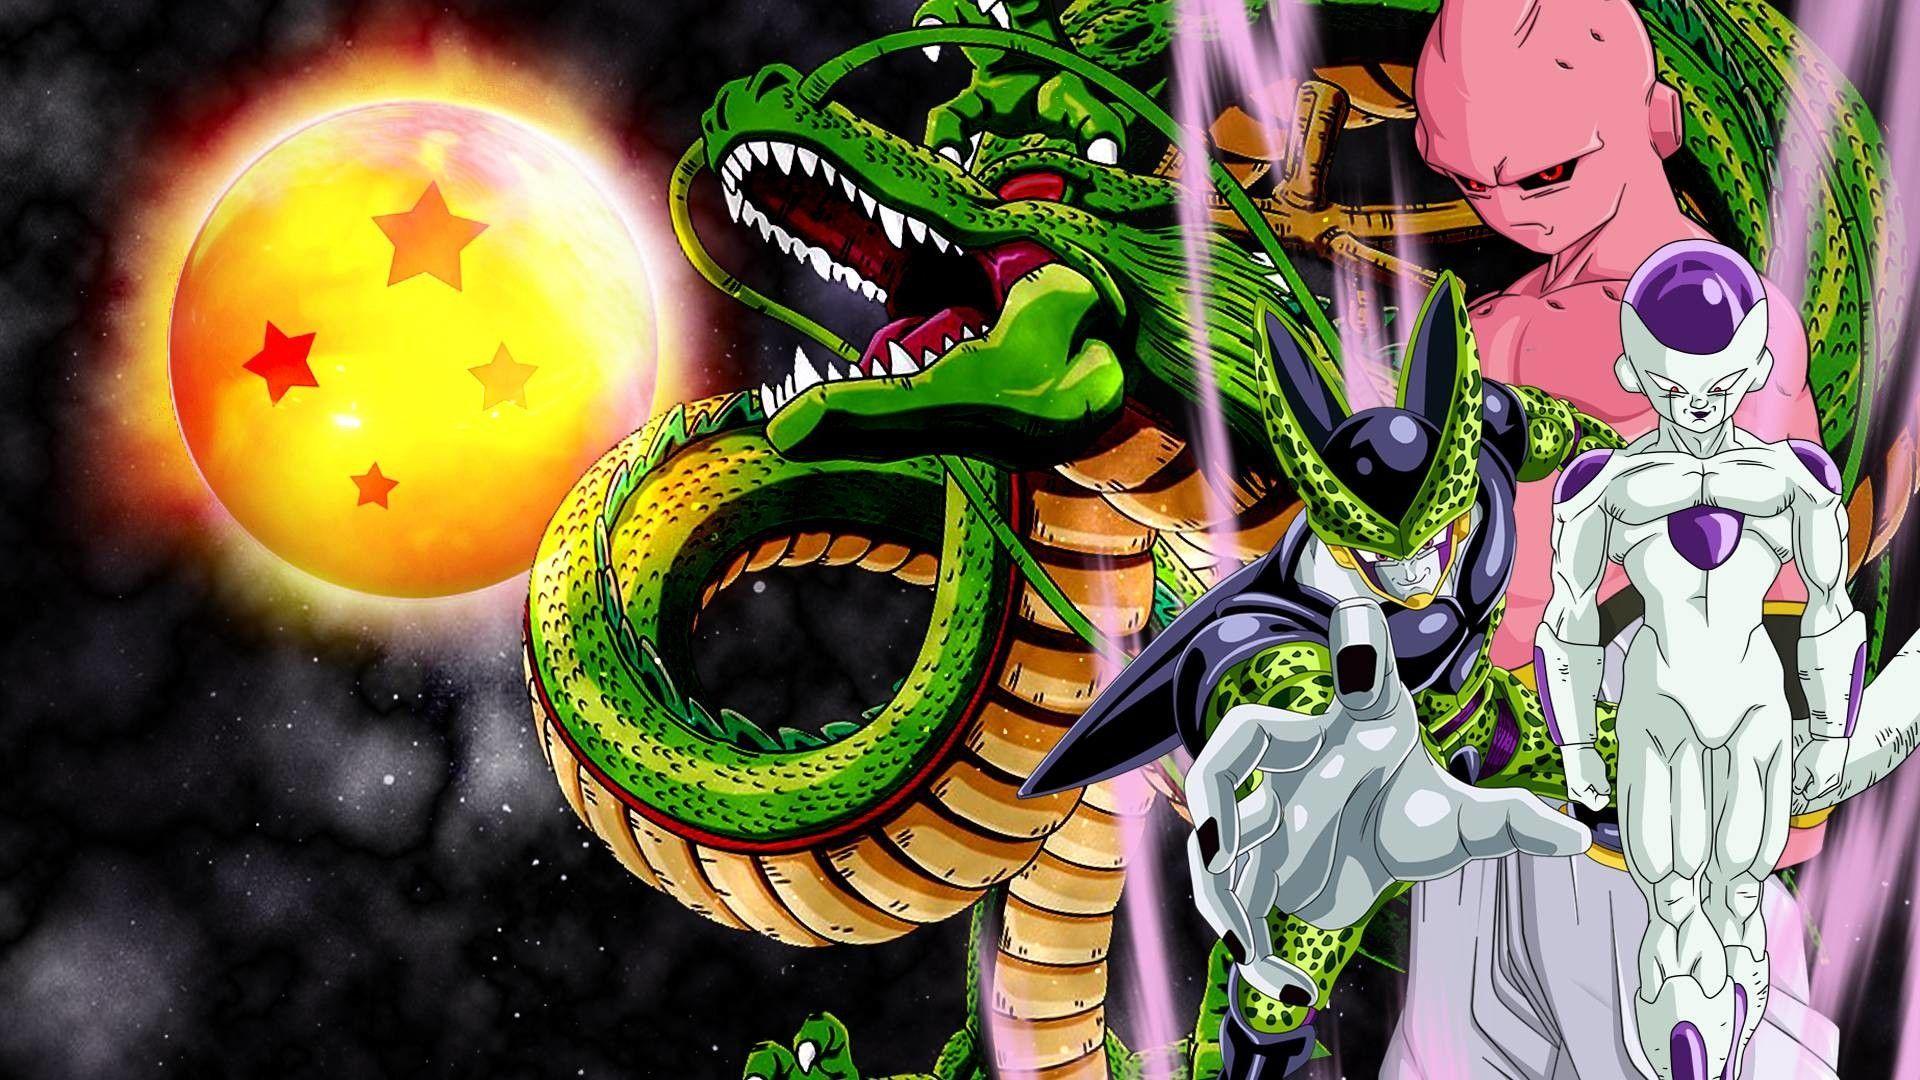 frieza poster for room wall dragon ball z poster for roomno need of double  side tape Paper Print  Animation  Cartoons posters in India  Buy art  film design movie music